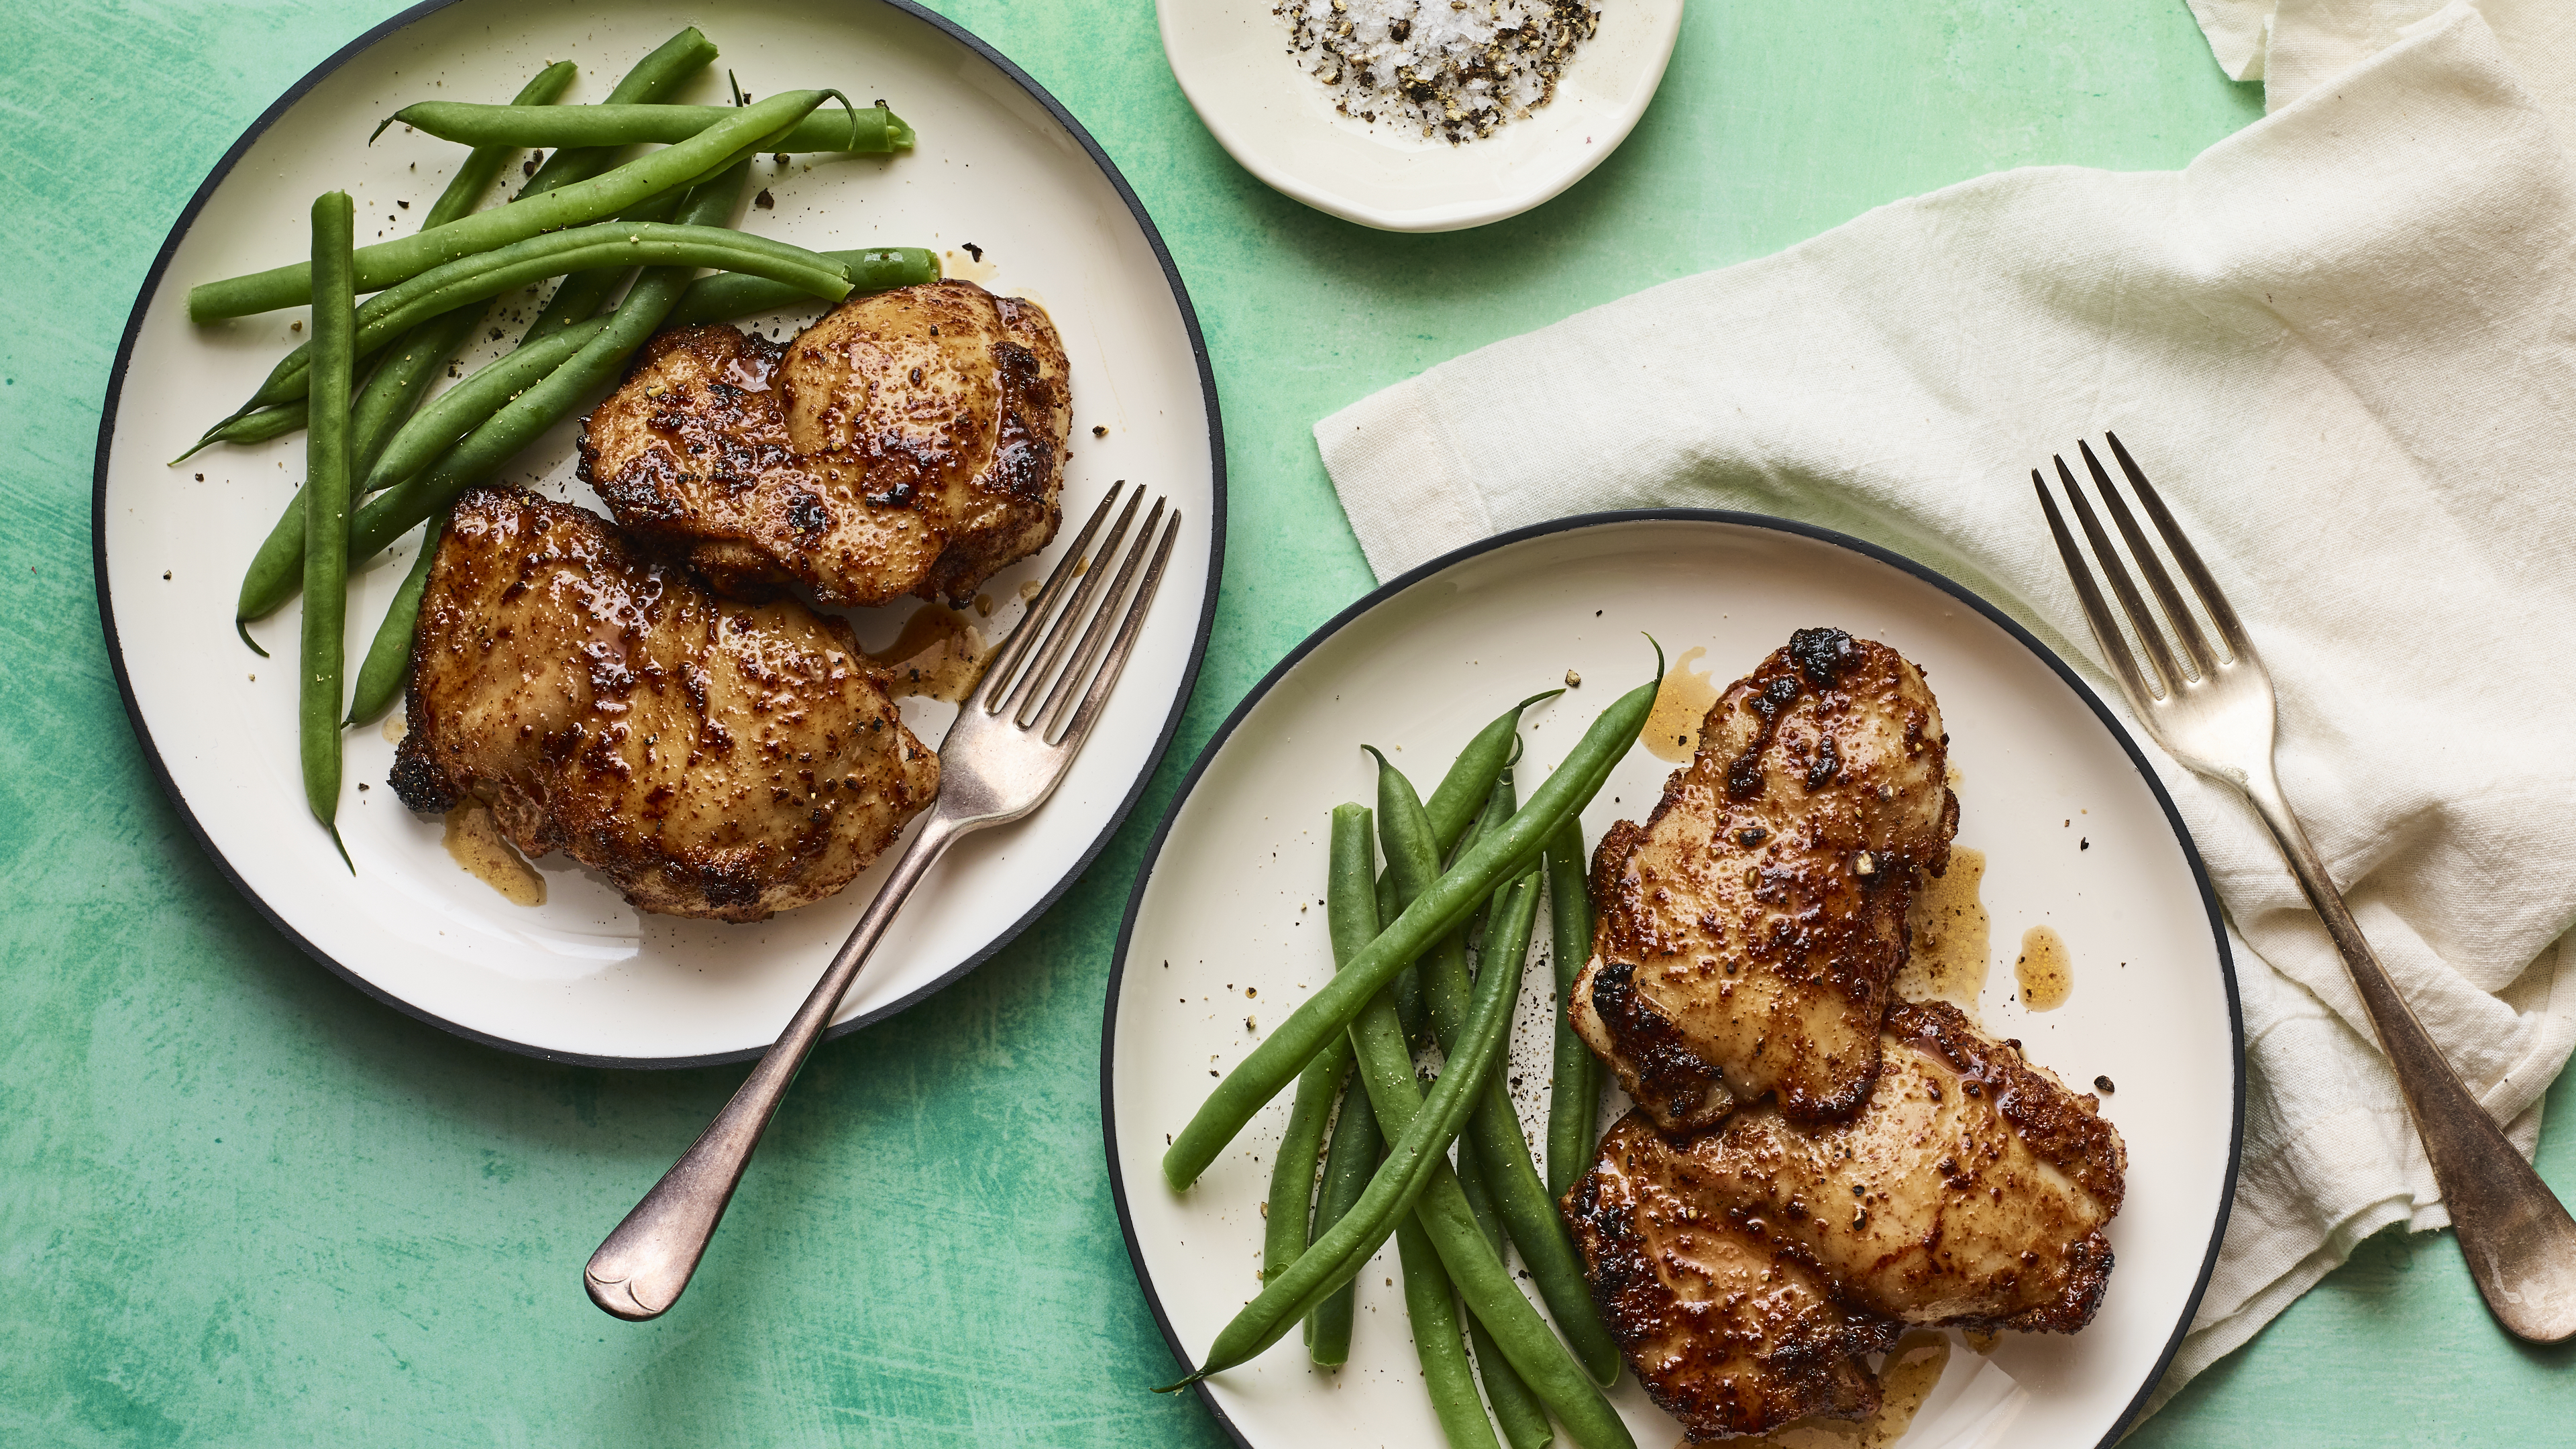 SPICY HONEY-BRUSHED CHICKEN THIGHS